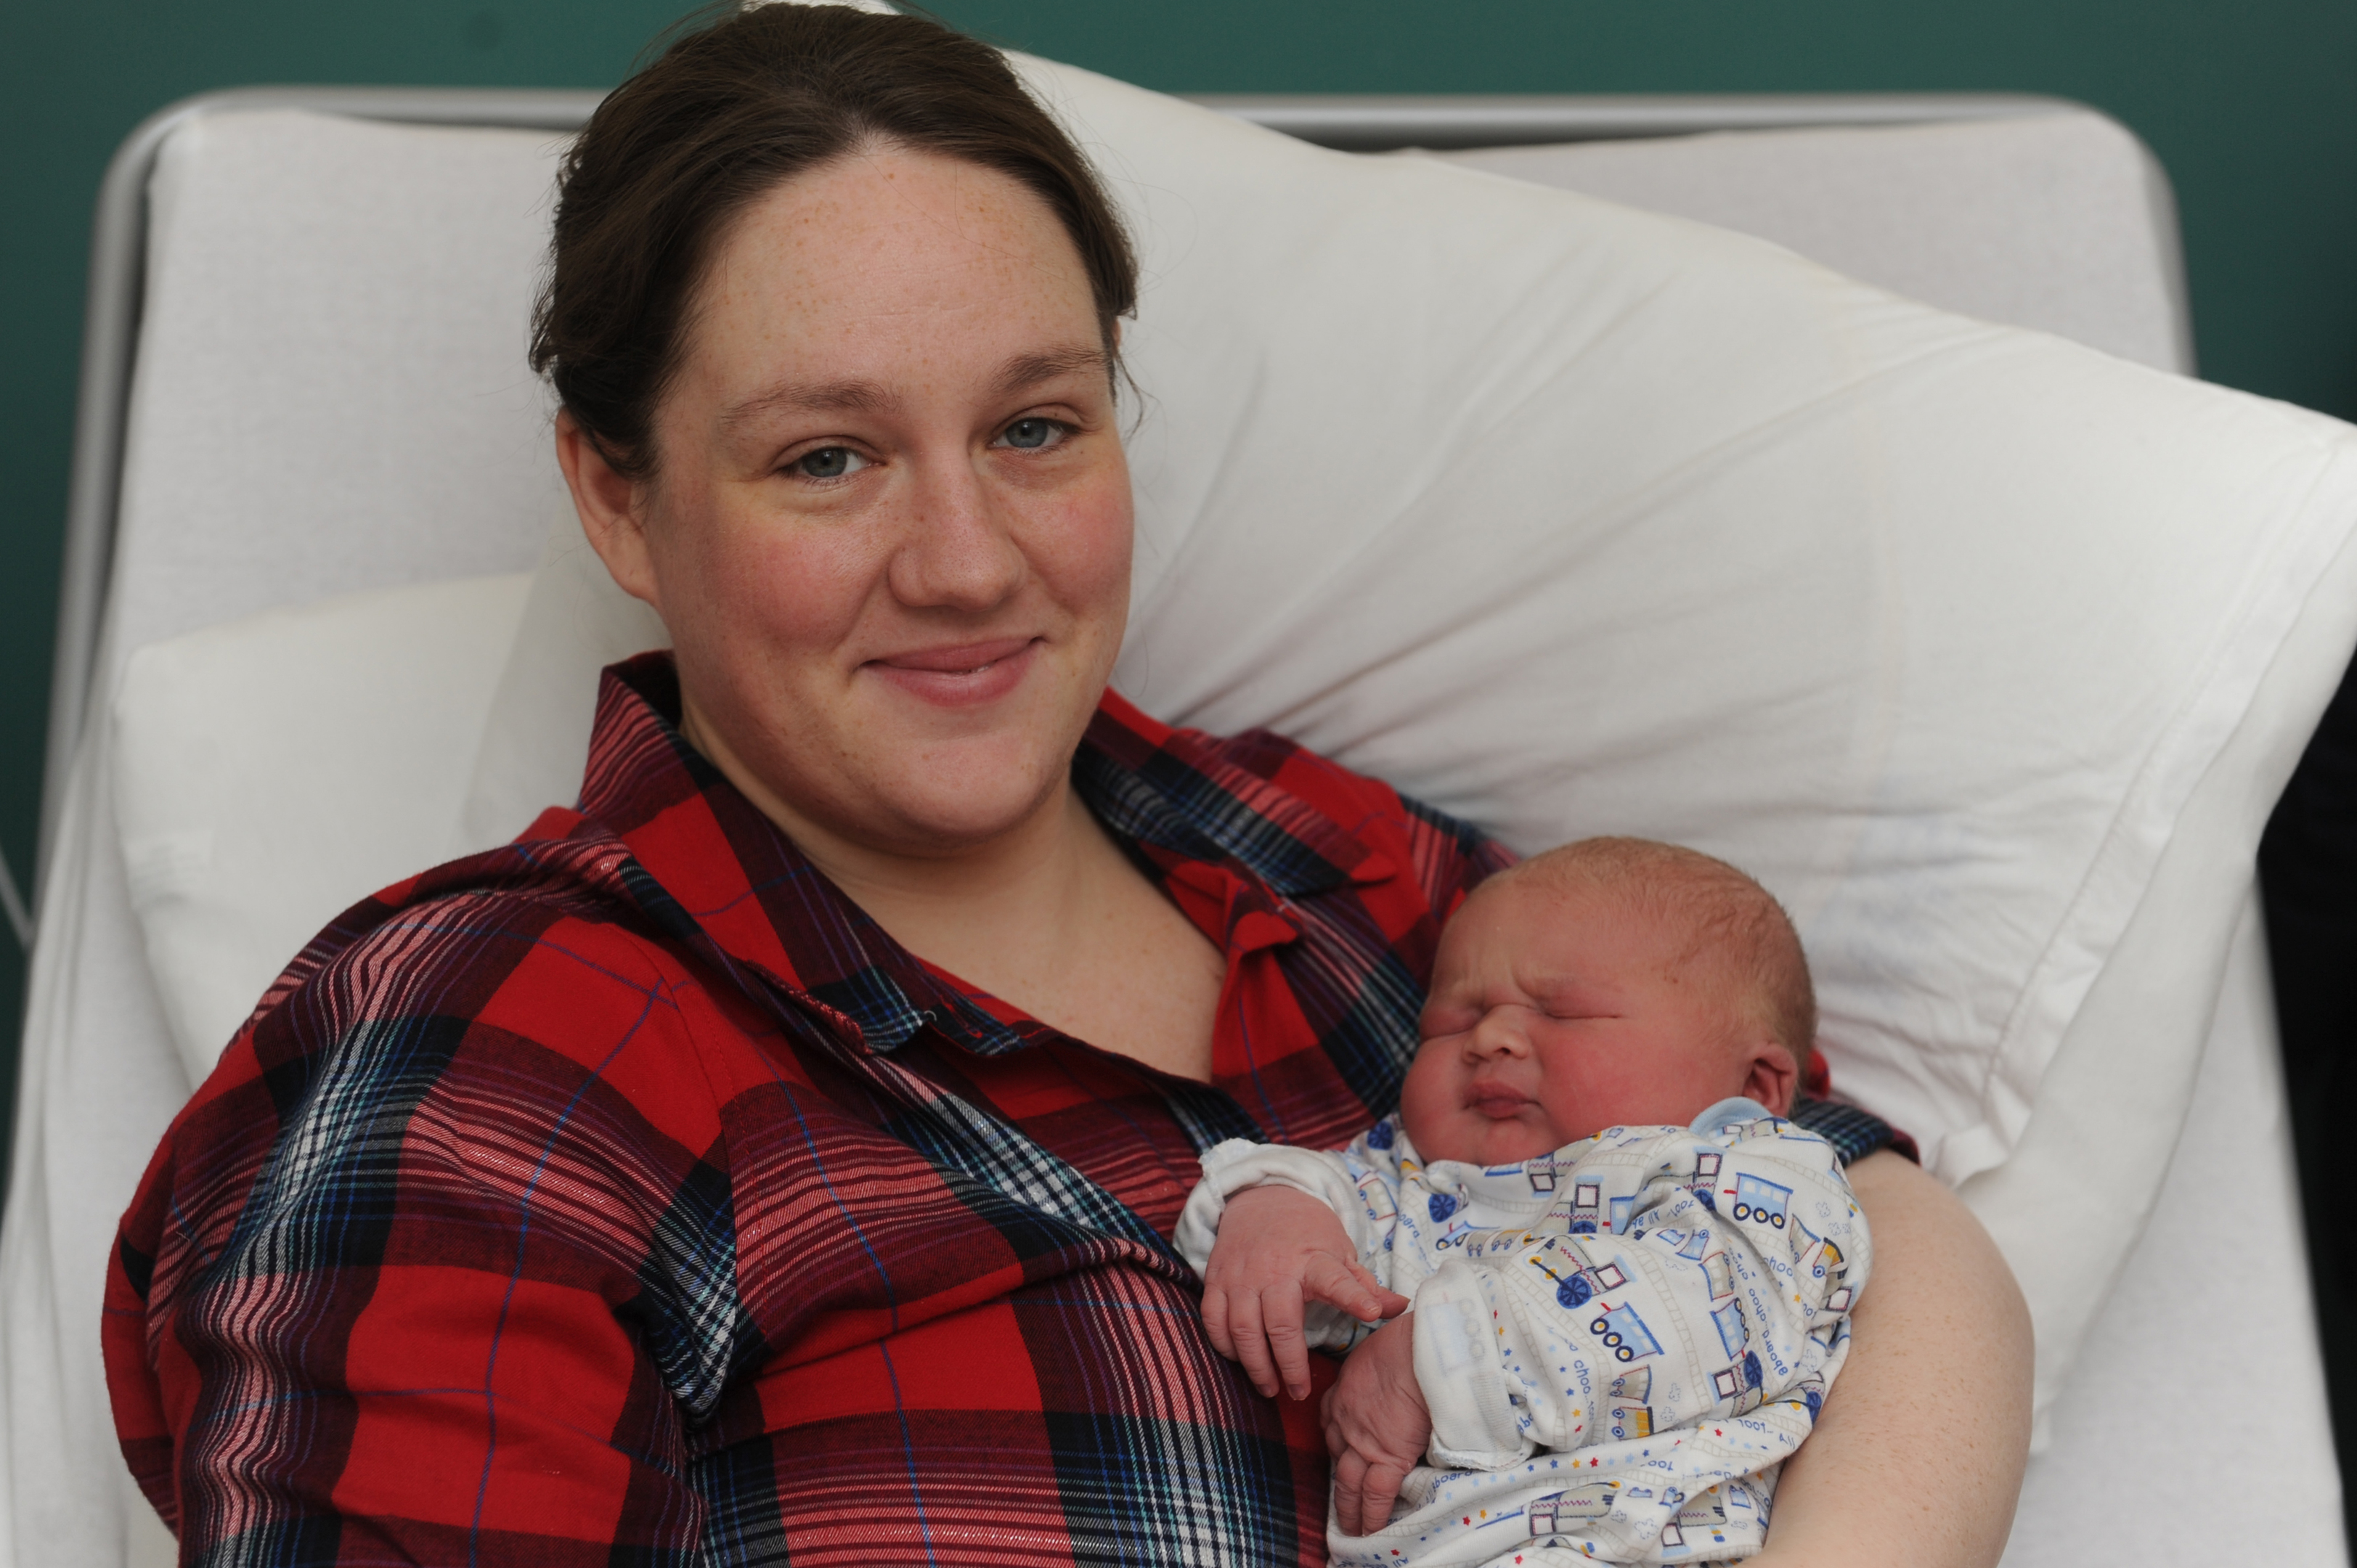 Jenna and James Headley, (absent from photocall was dad Scott), James was born at 7.09am, weighing 11lbs 1 oz and is their first child. Born at Ninewells Hospital, Dundee